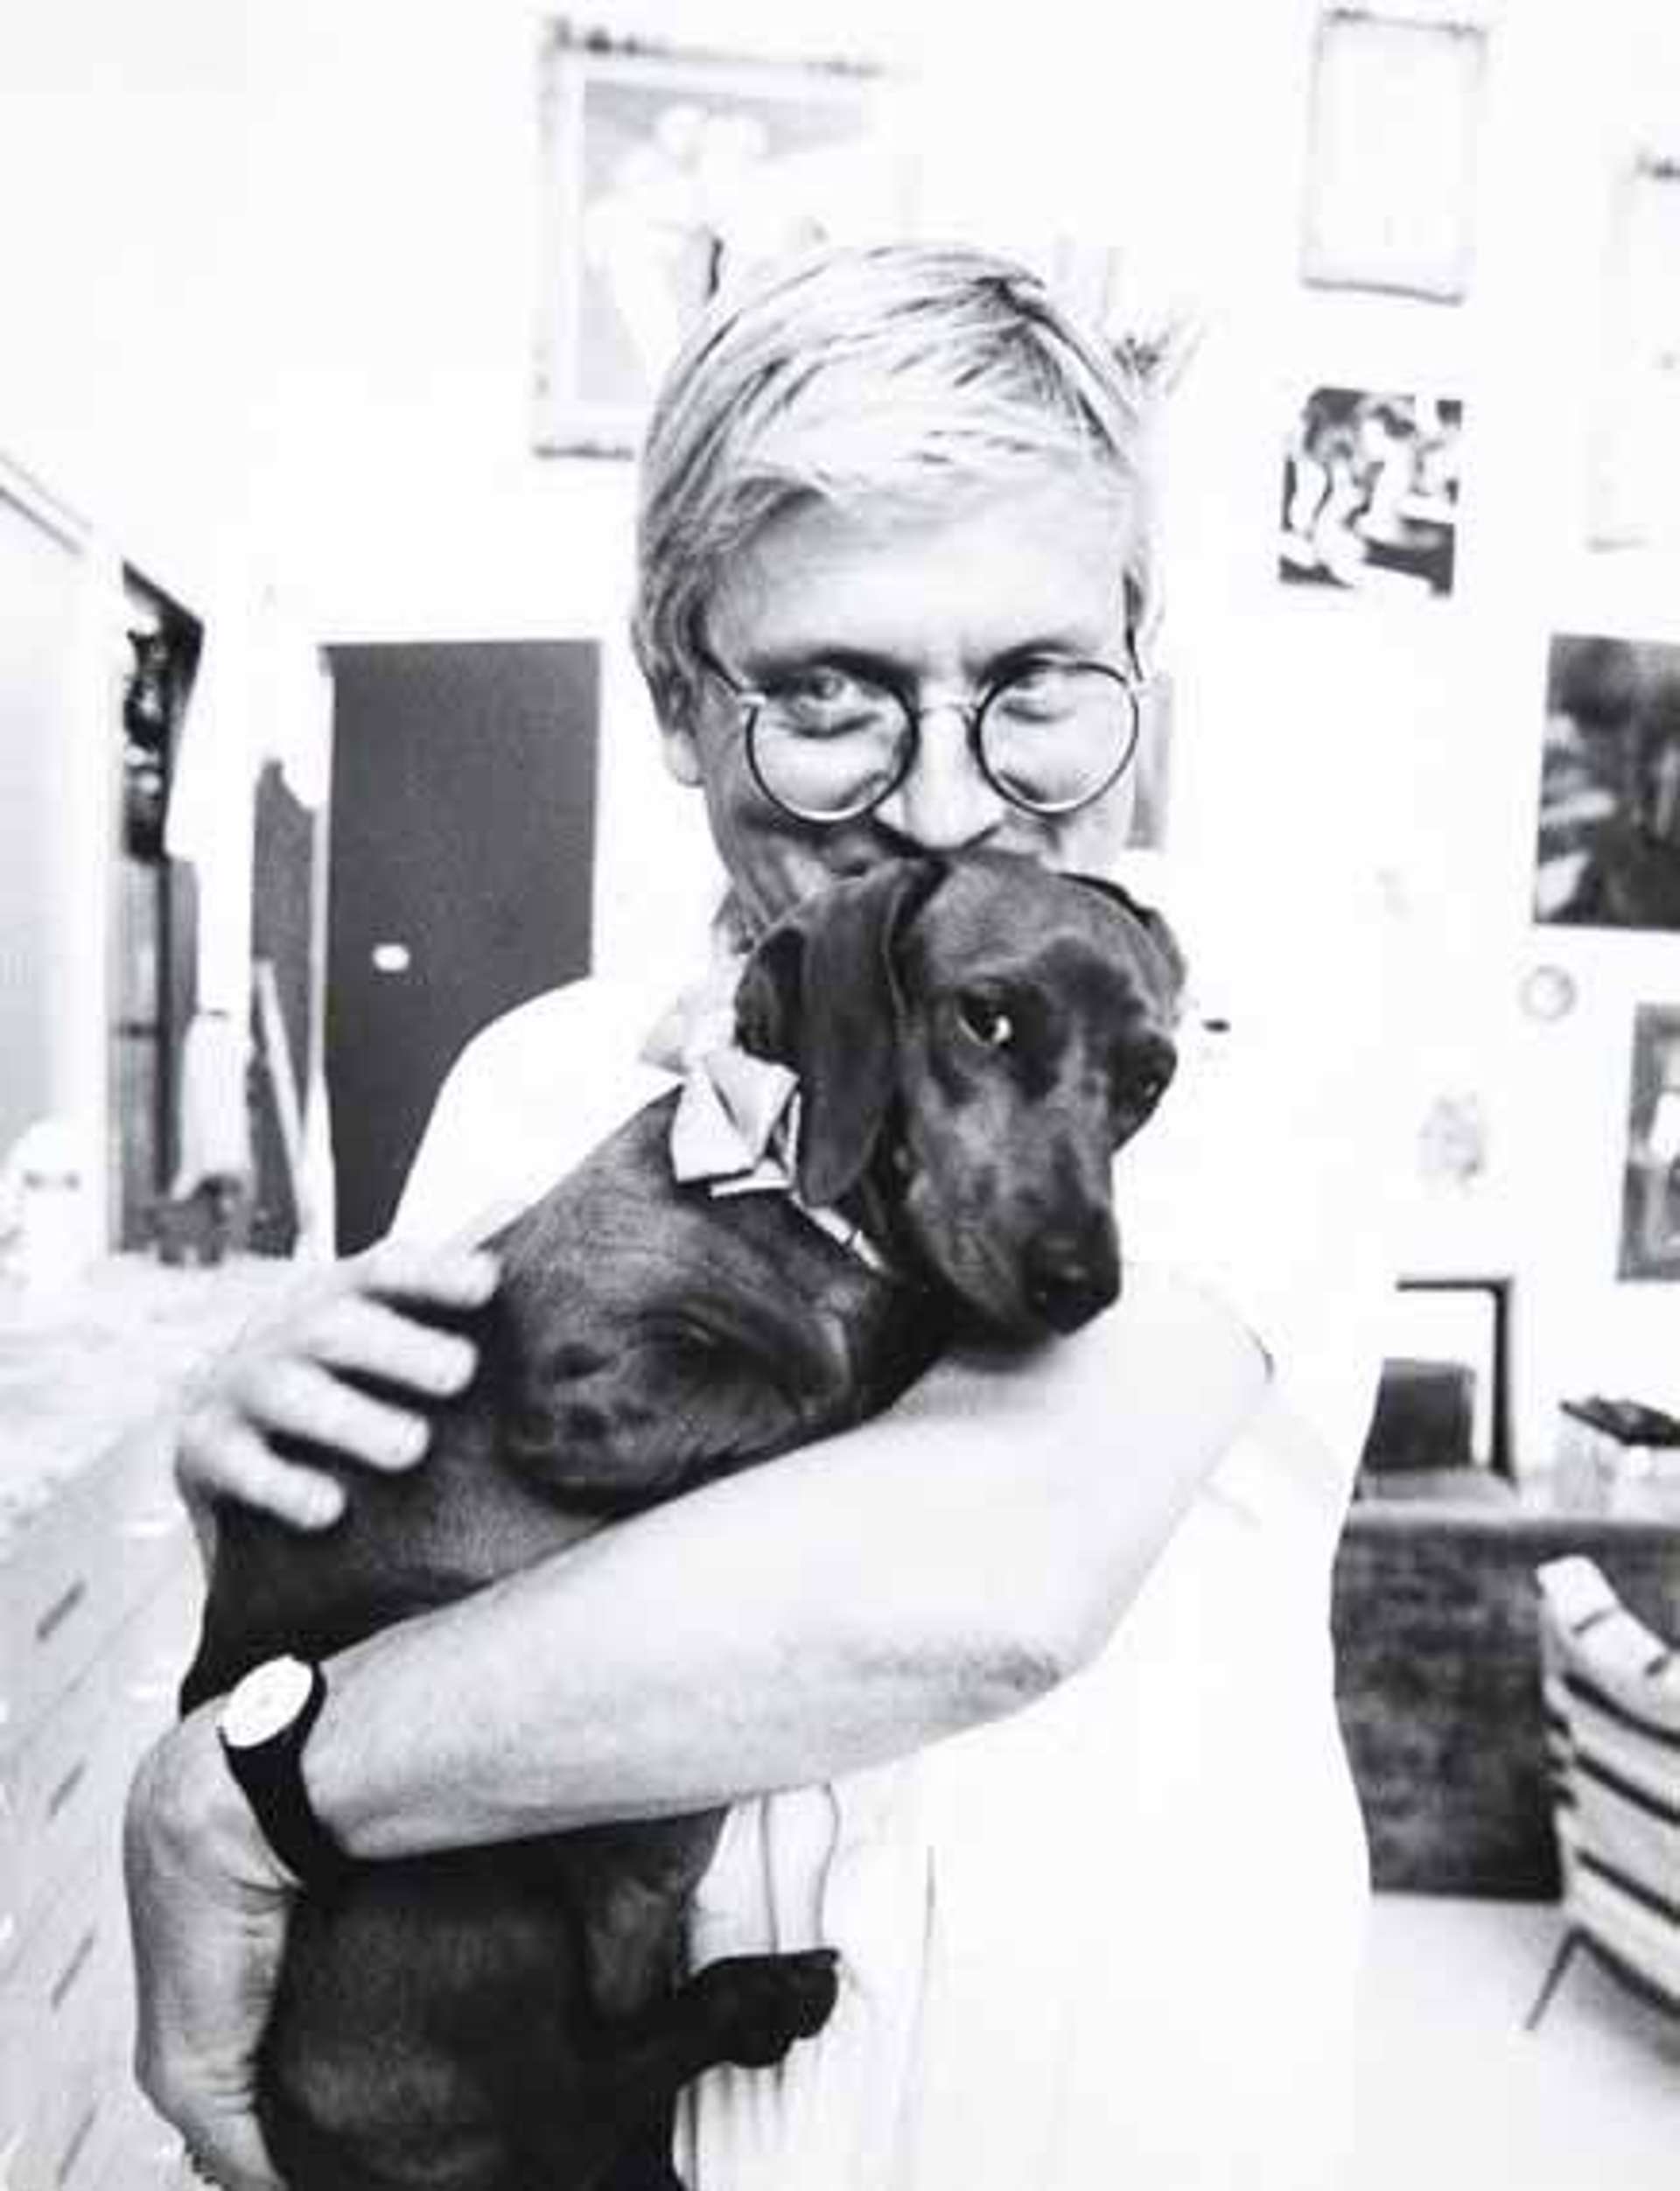 A monochrome photograph of David Hockney cuddling one of his beloved Dachshunds.